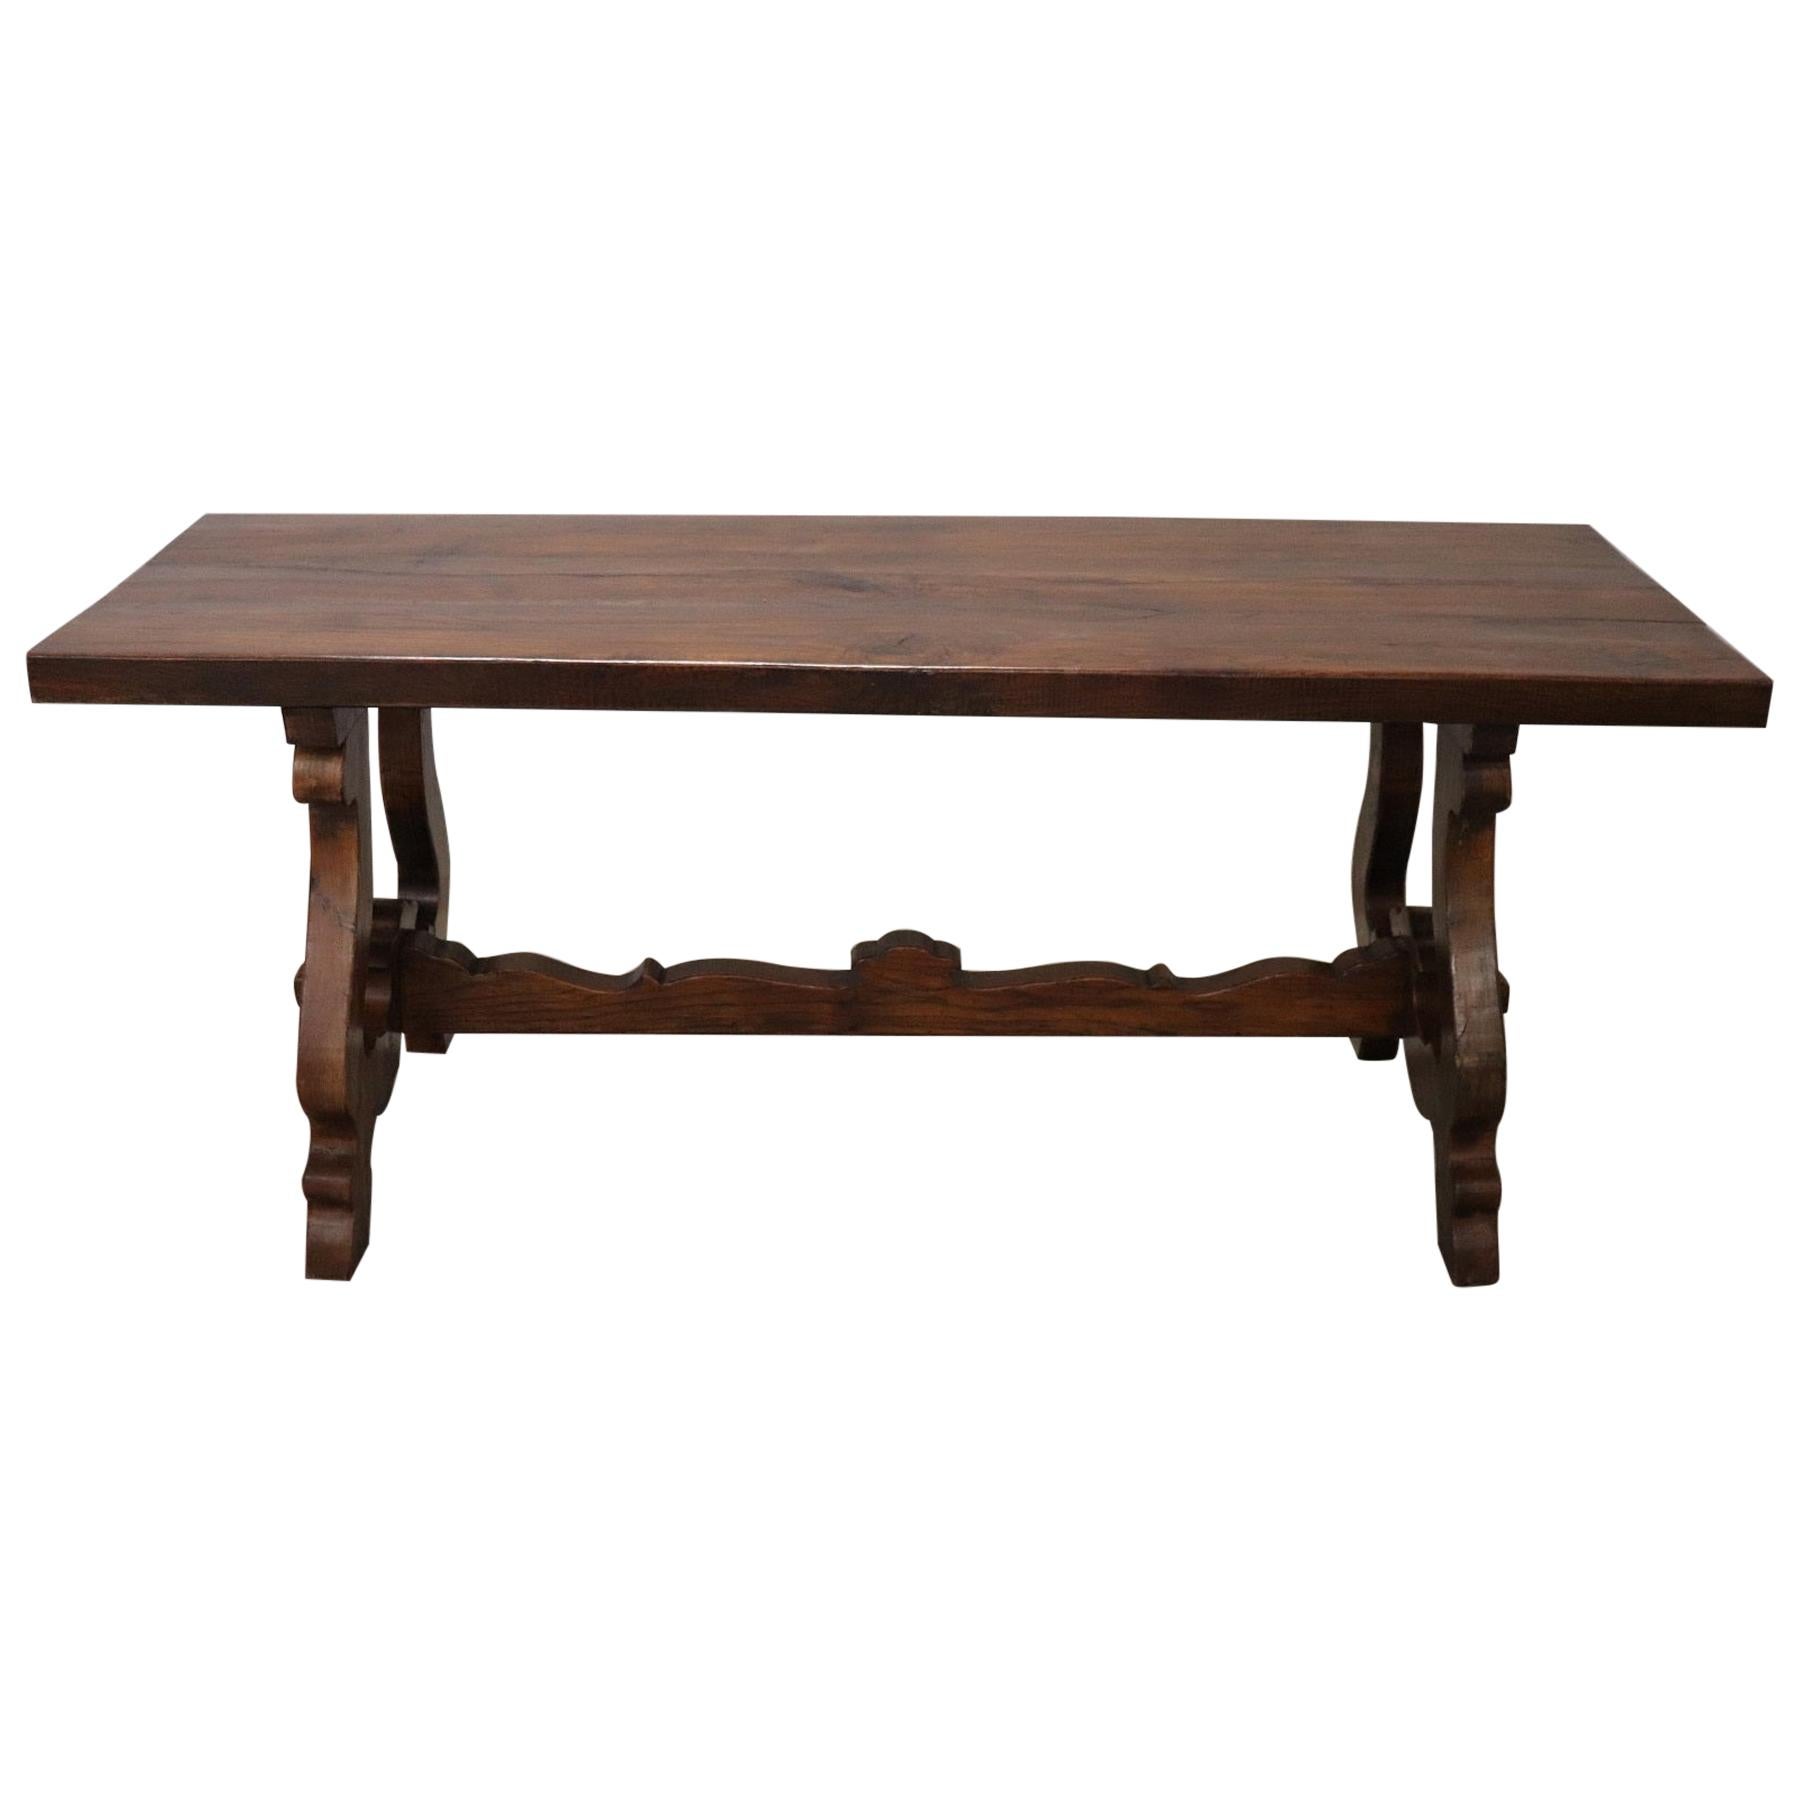 20th Century Italian Tuscan Large Fratino Dining Room Table in Solid Oakwood